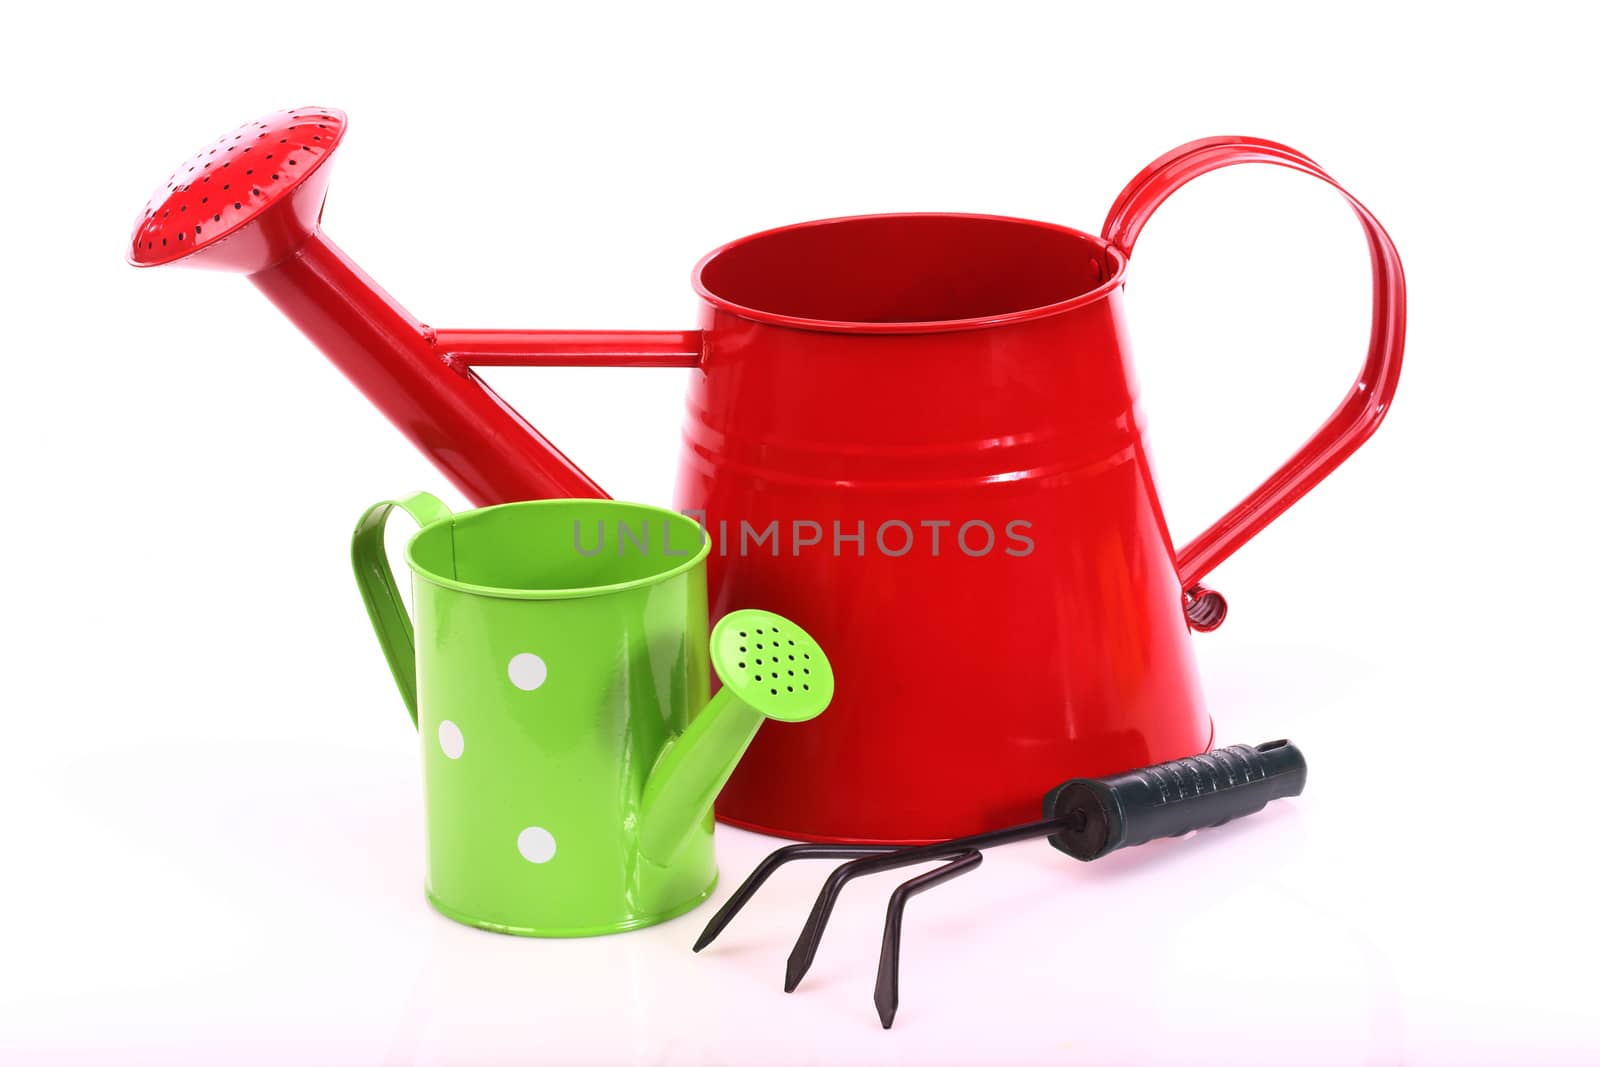 watering cans by alexkosev